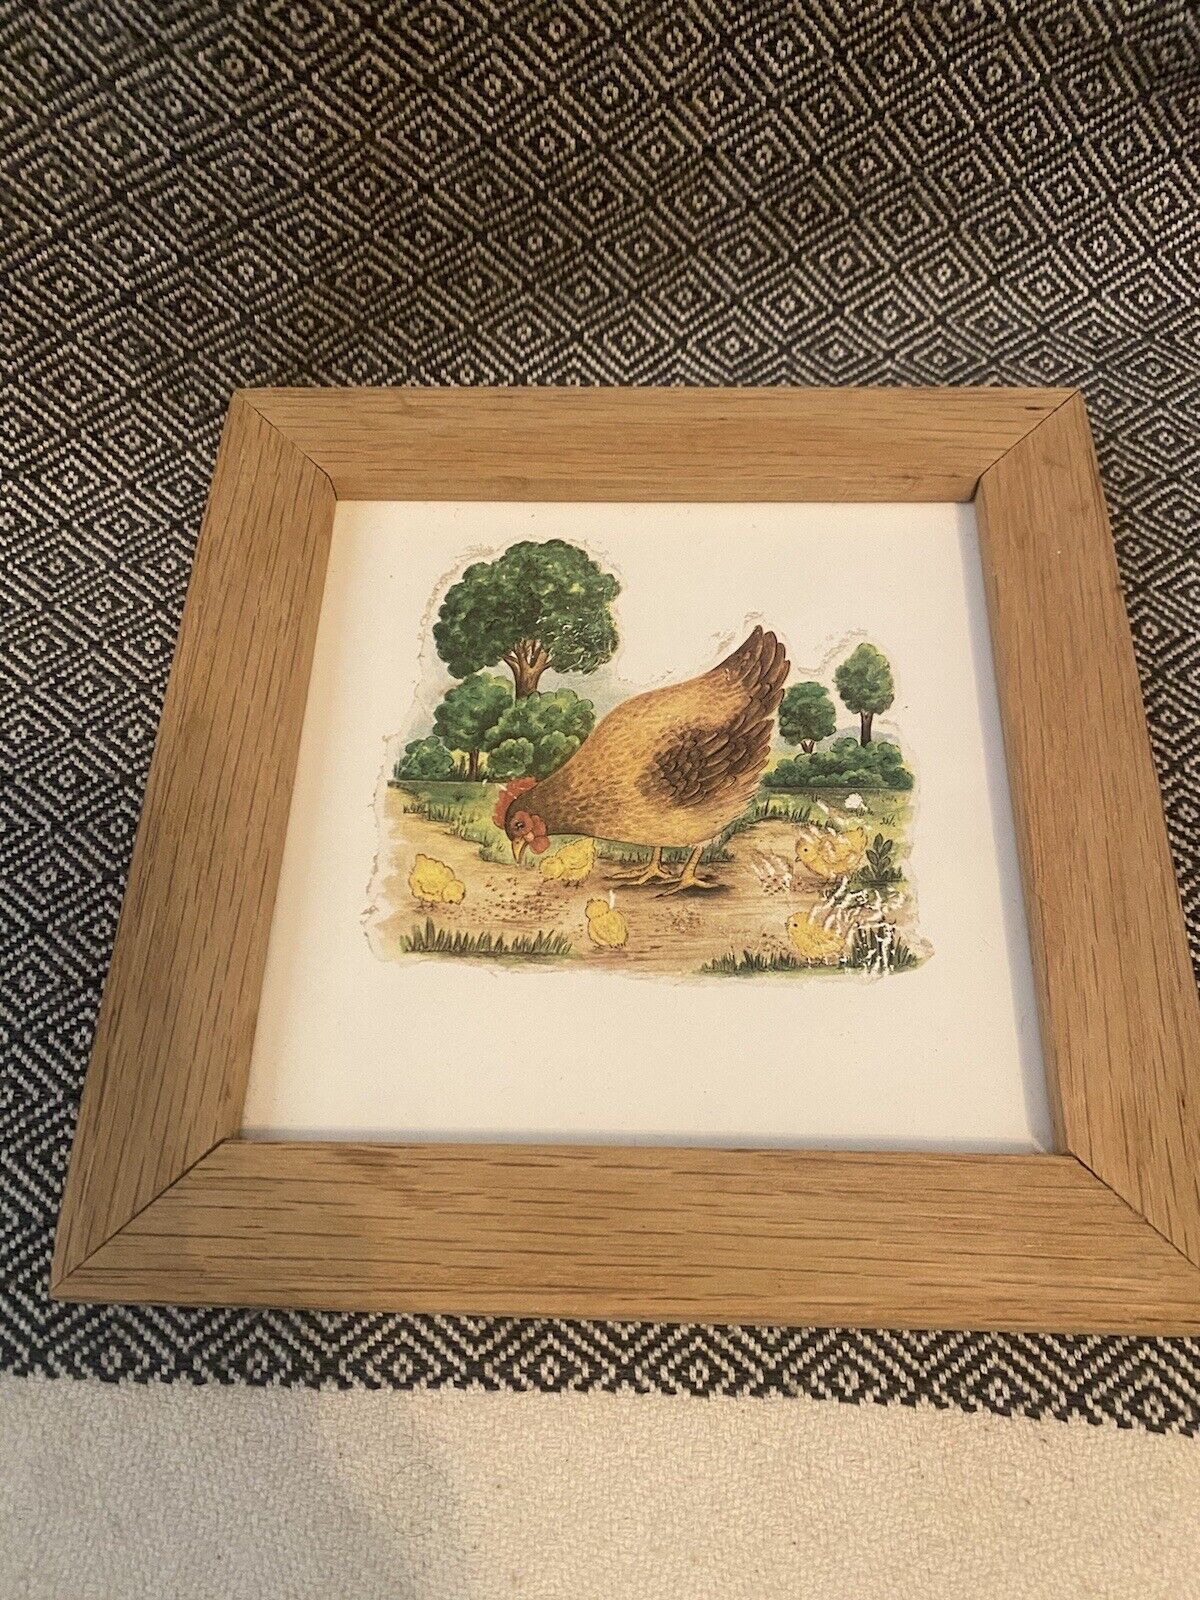 Vintage framed hanging tile made in Mexico, mother hen with five small chicks